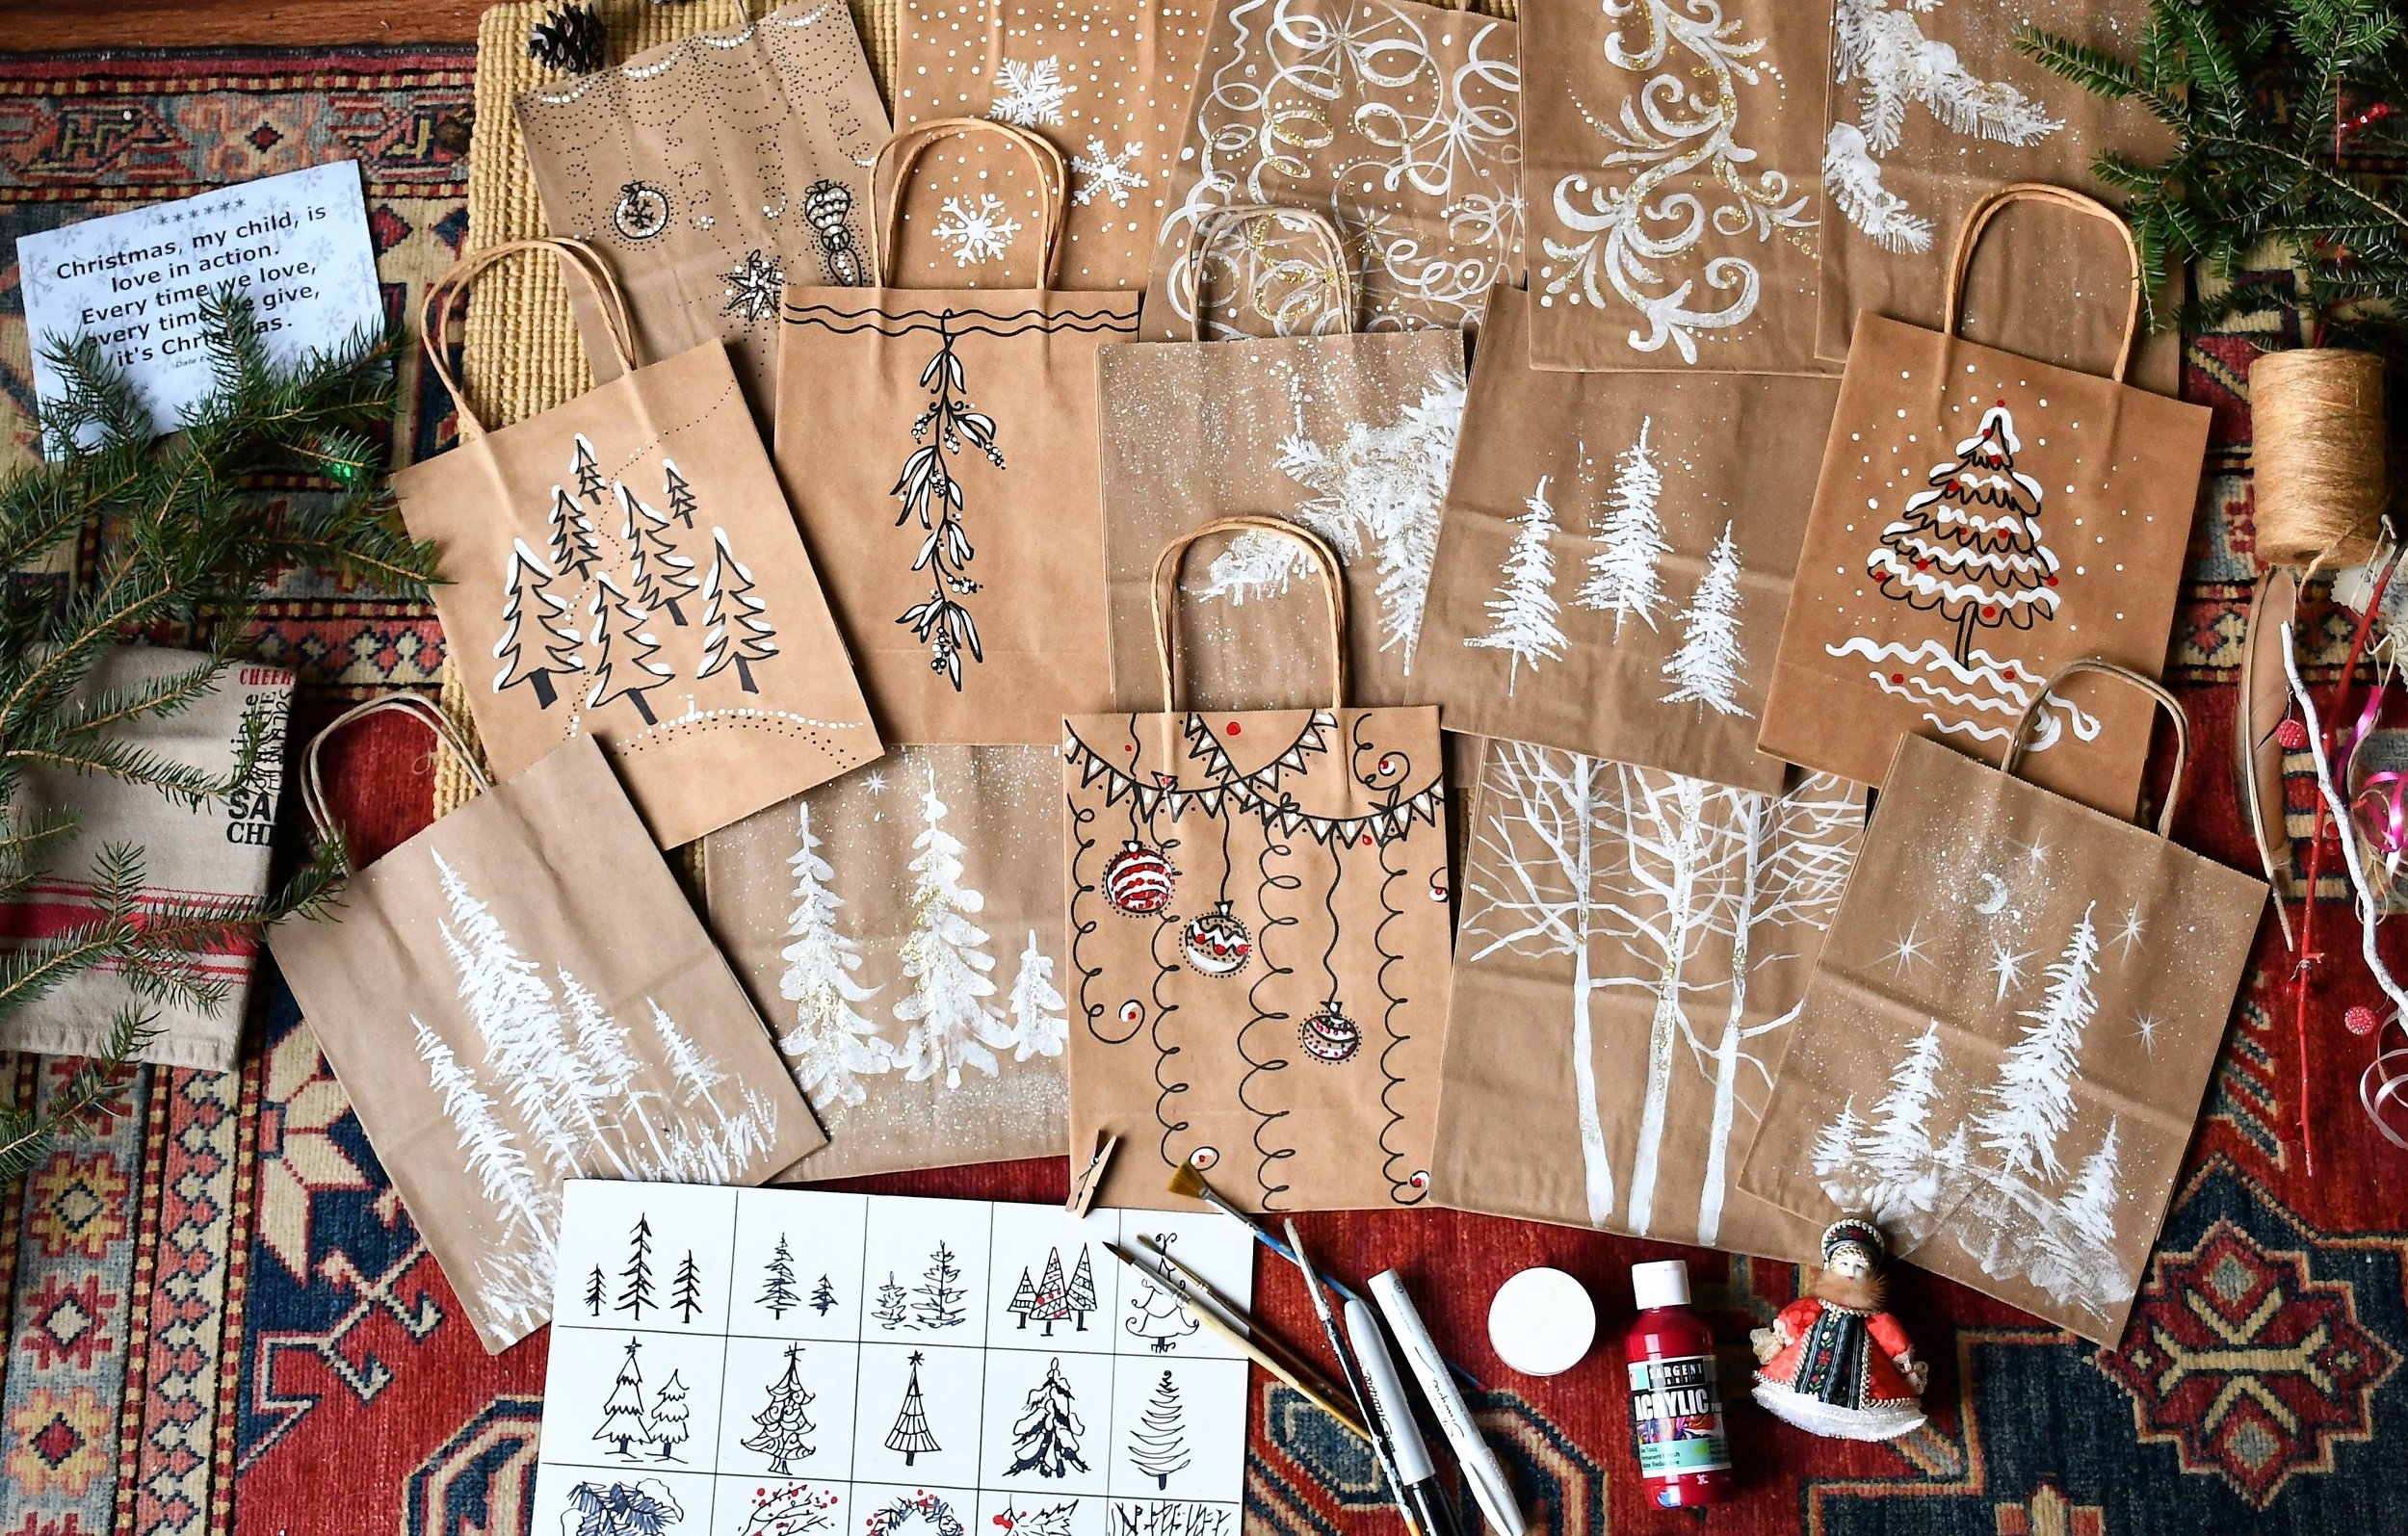 DIY Holiday Lights Wrapping Paper, Crafts